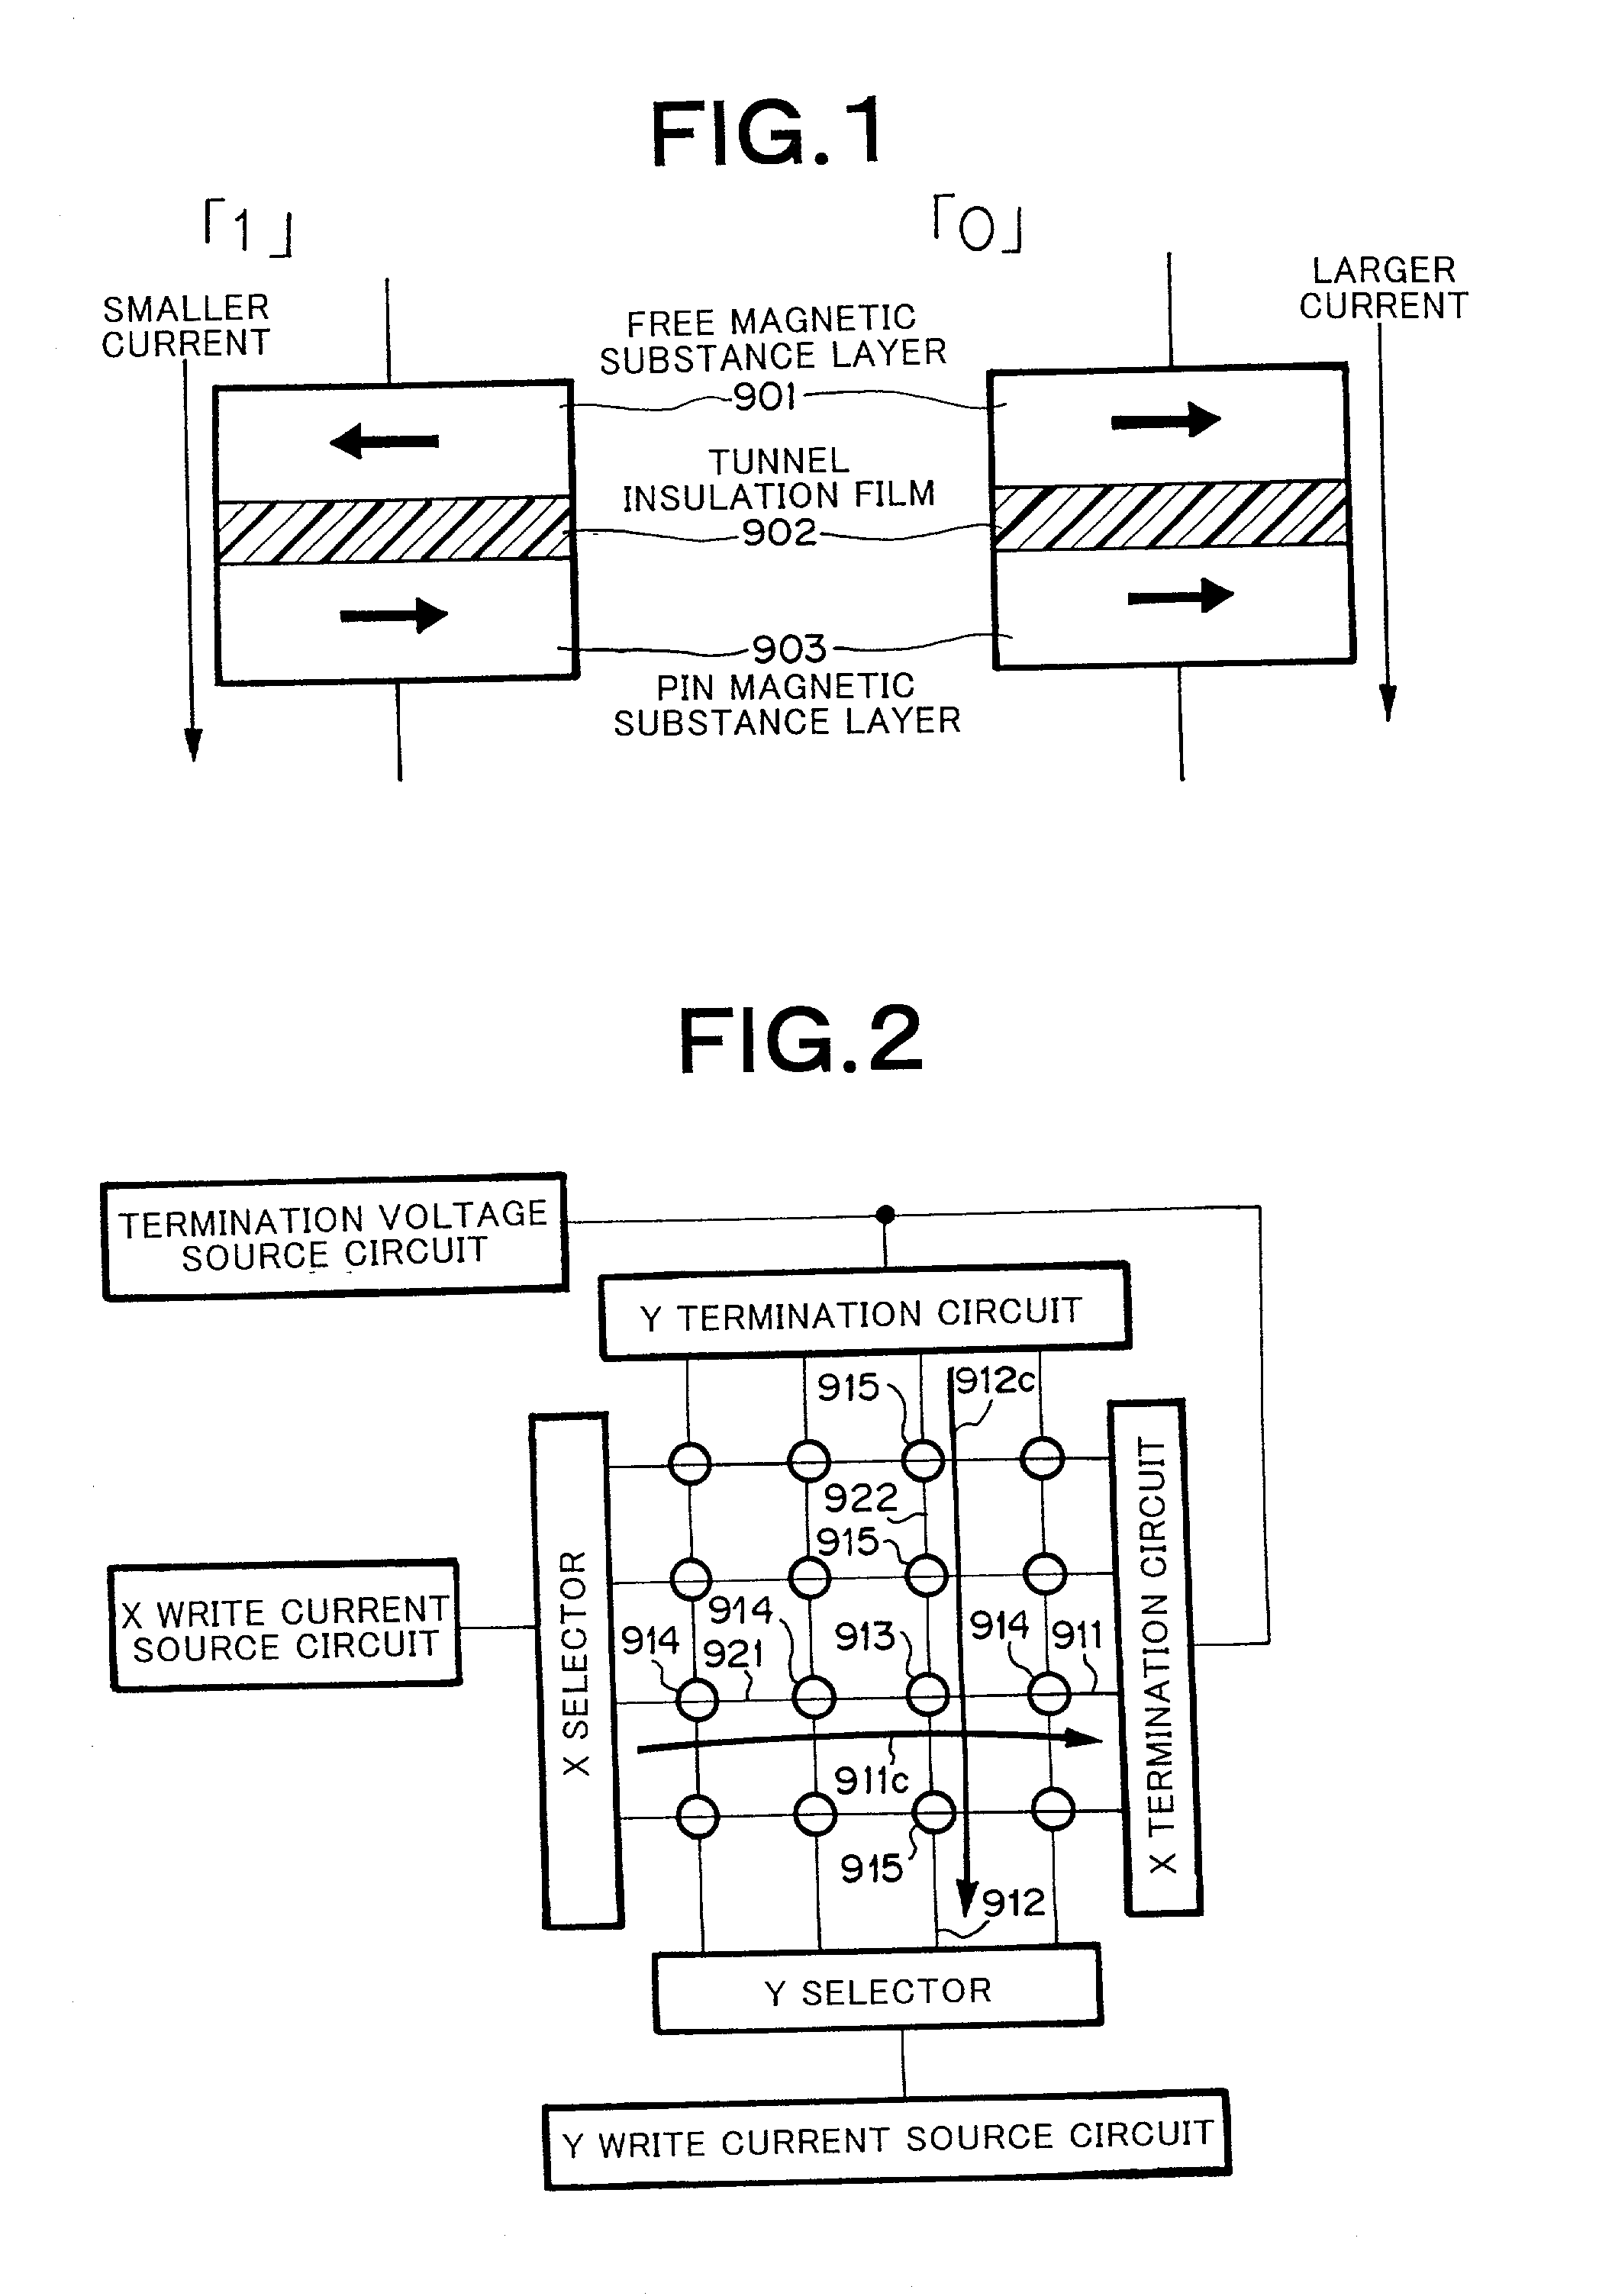 Semiconductor memory apparatus using tunnel magnetic resistance elements